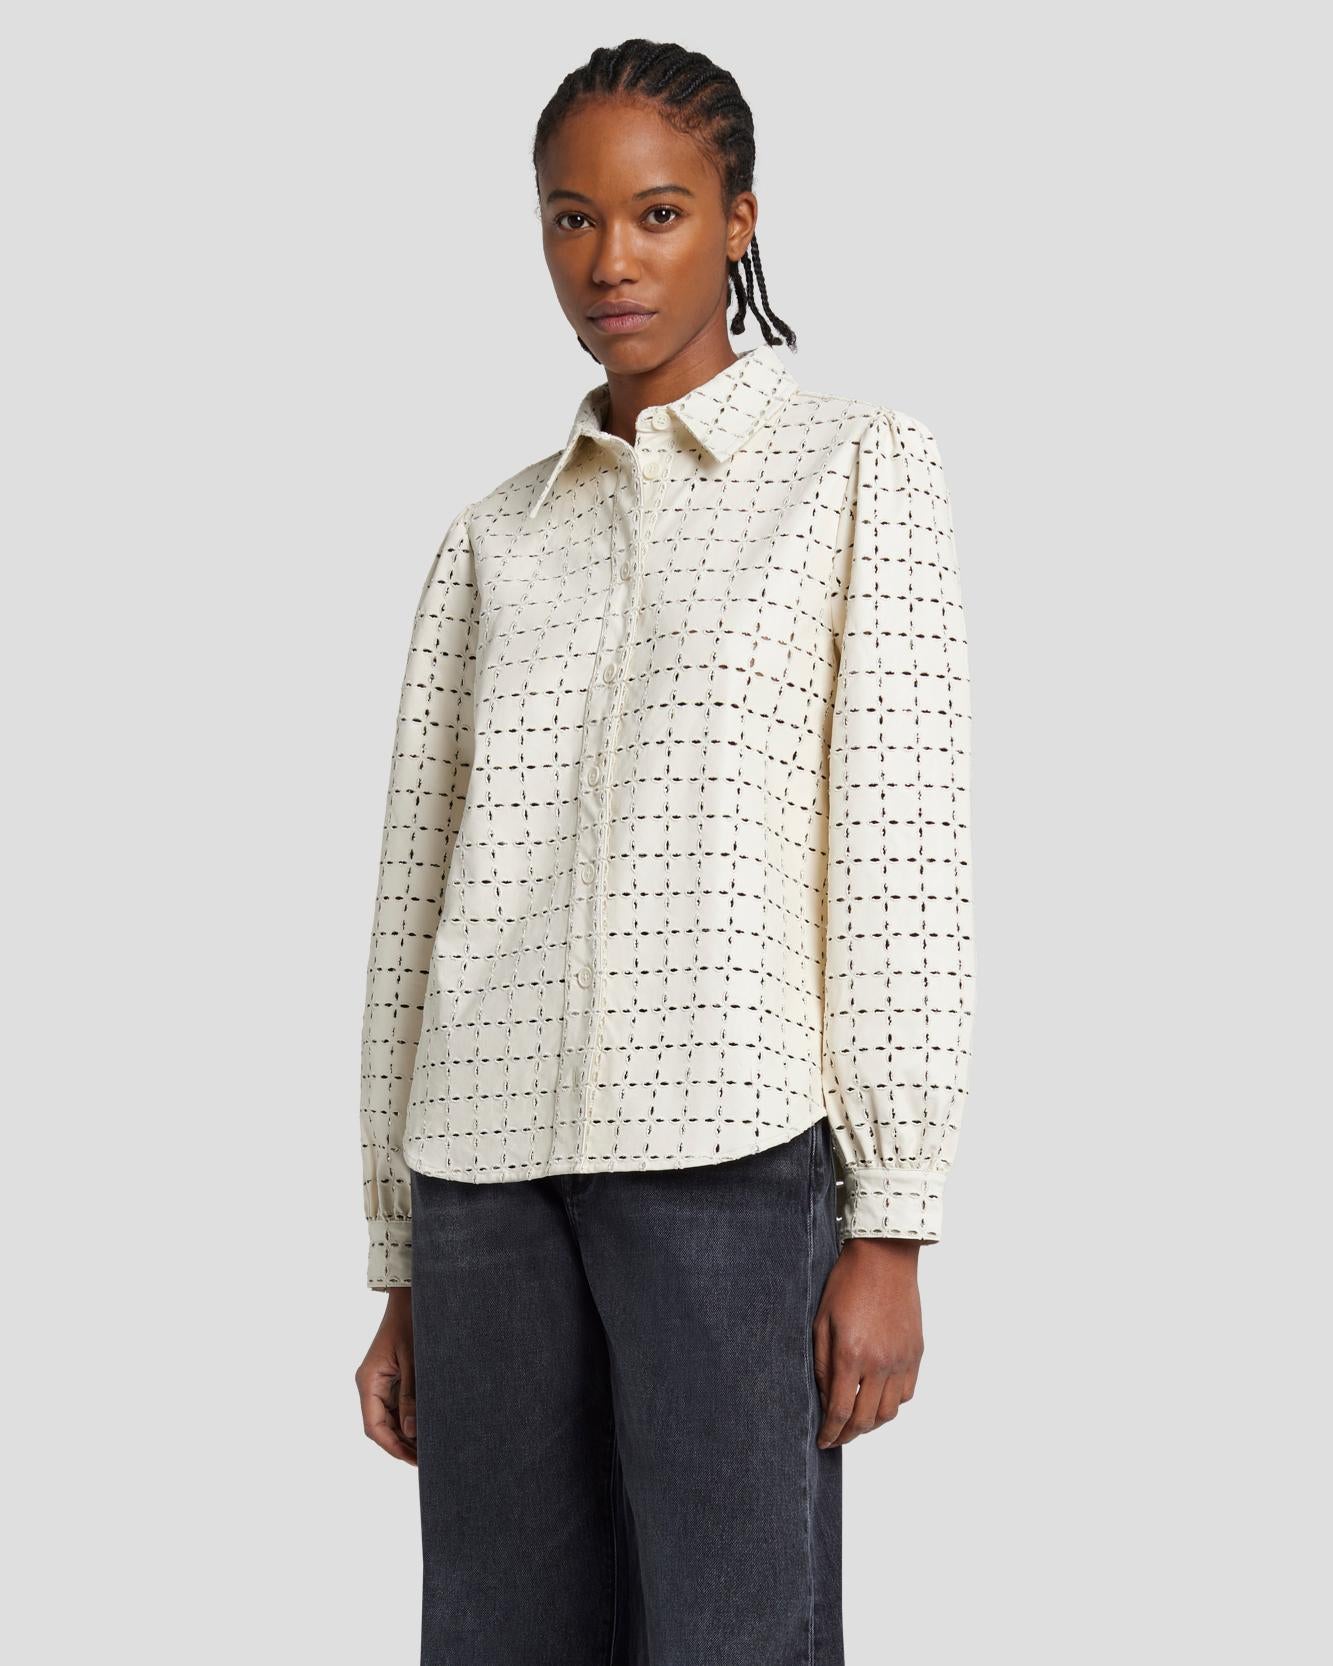 Faux Leather Eyelet Classic Shirt in Cream | 7 For All Mankind